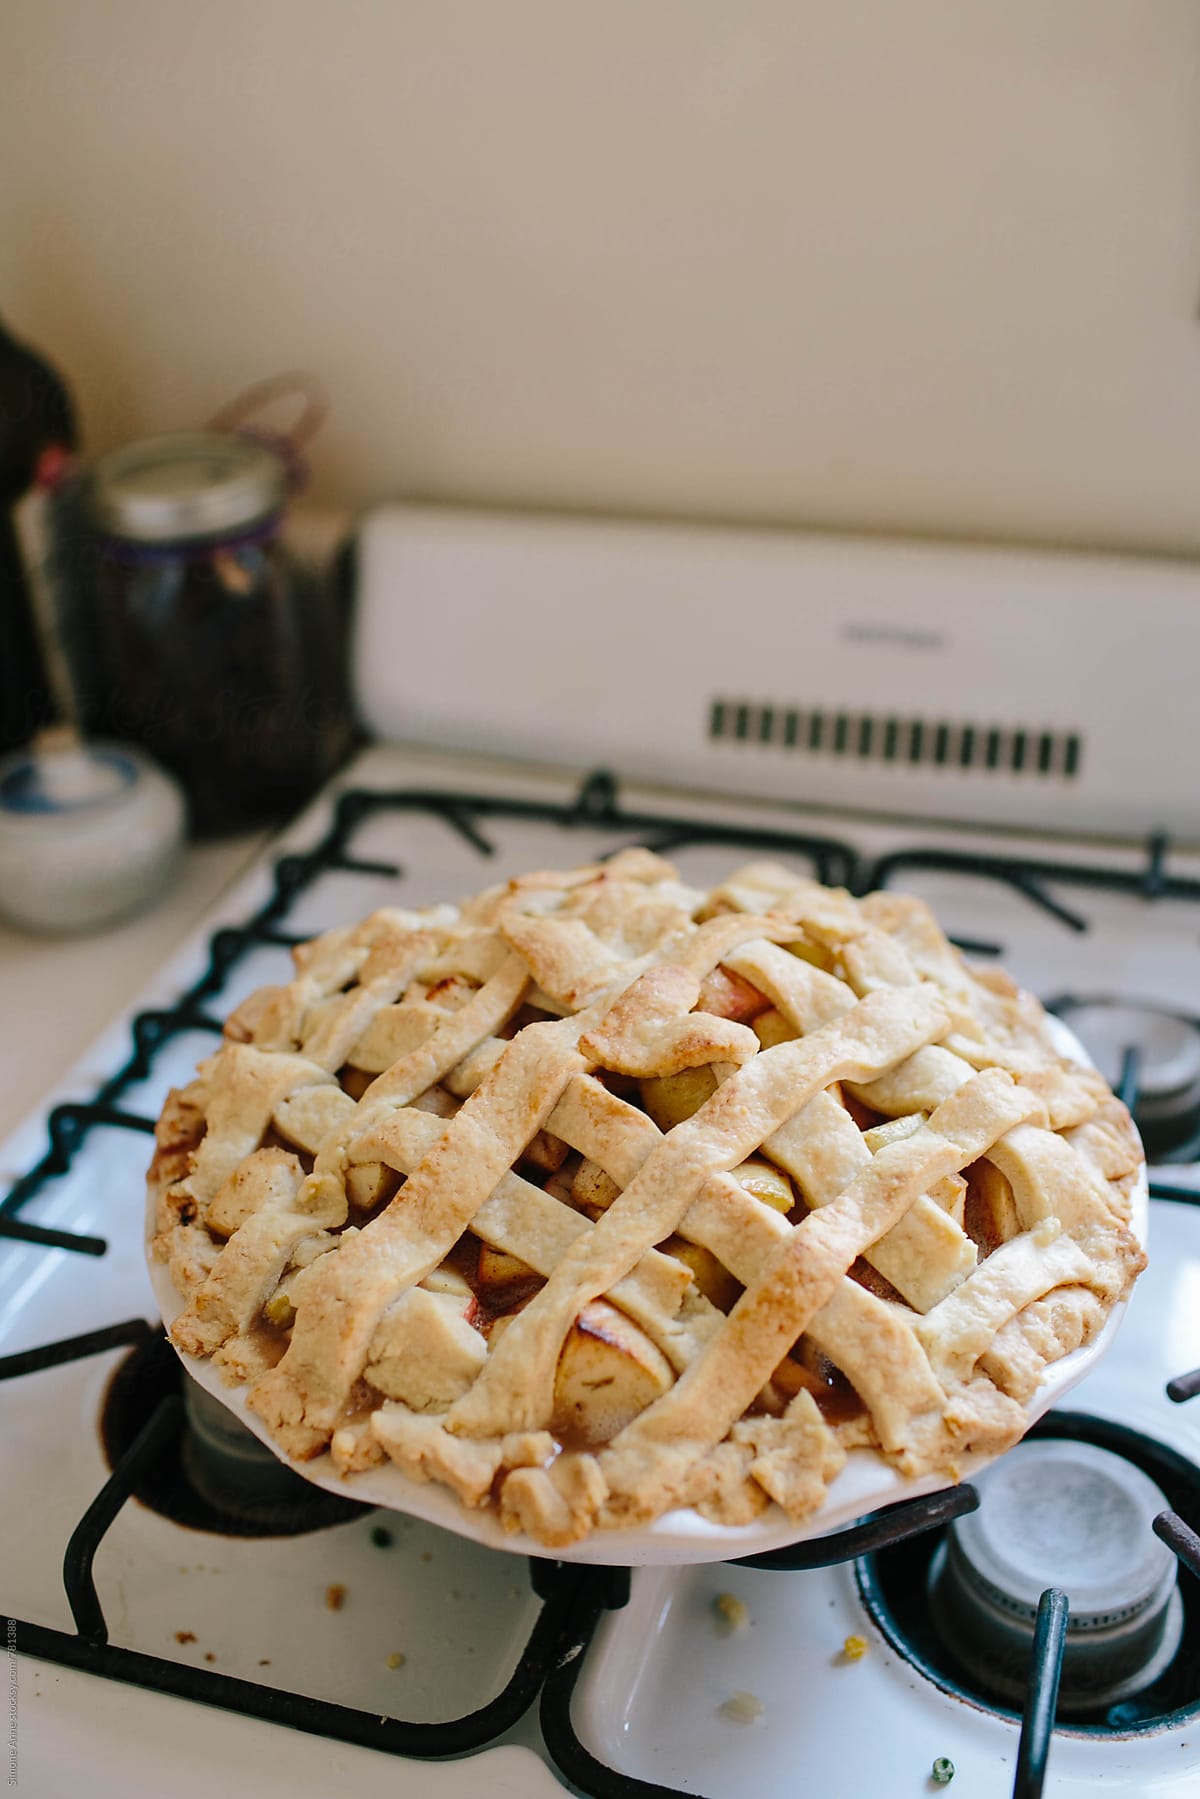 Baked apple pie sits on stove top